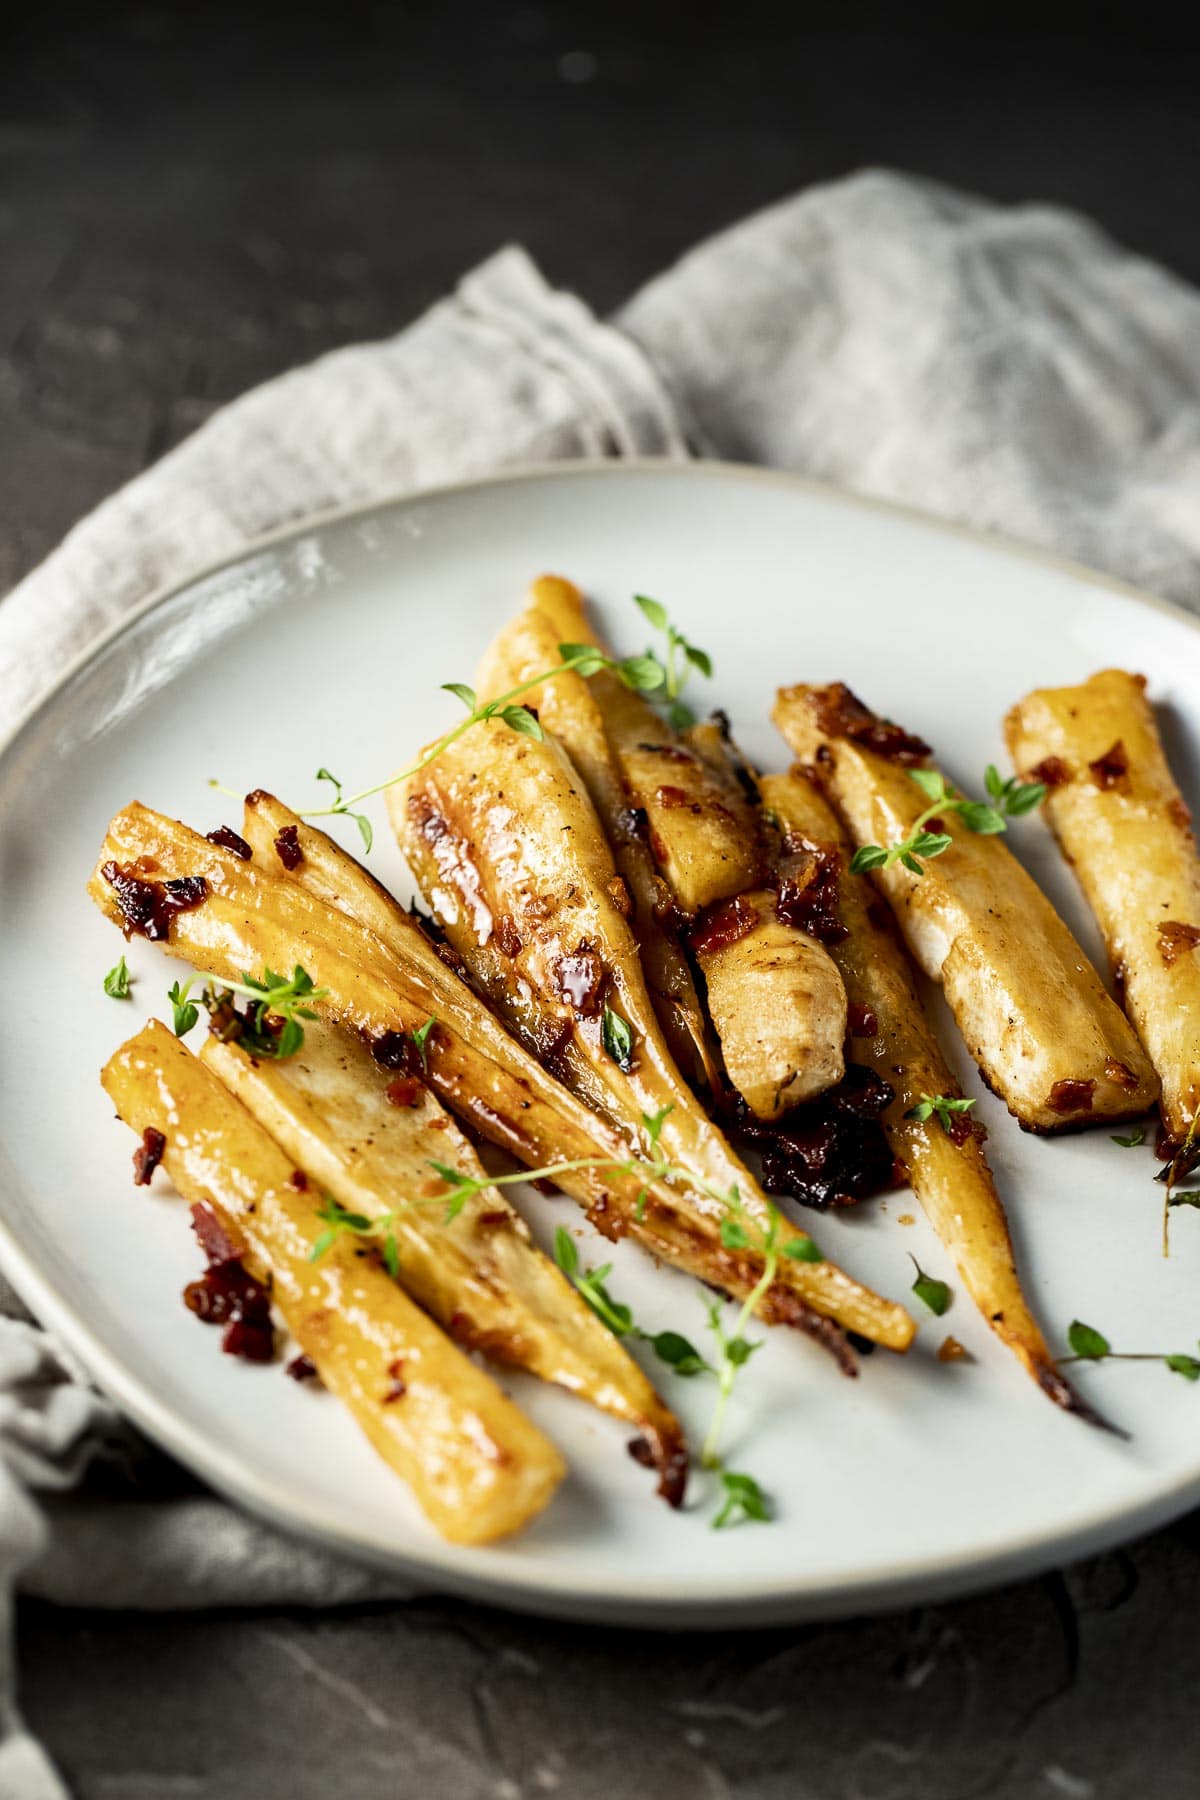 Side view of roasted parsnips on a plate.